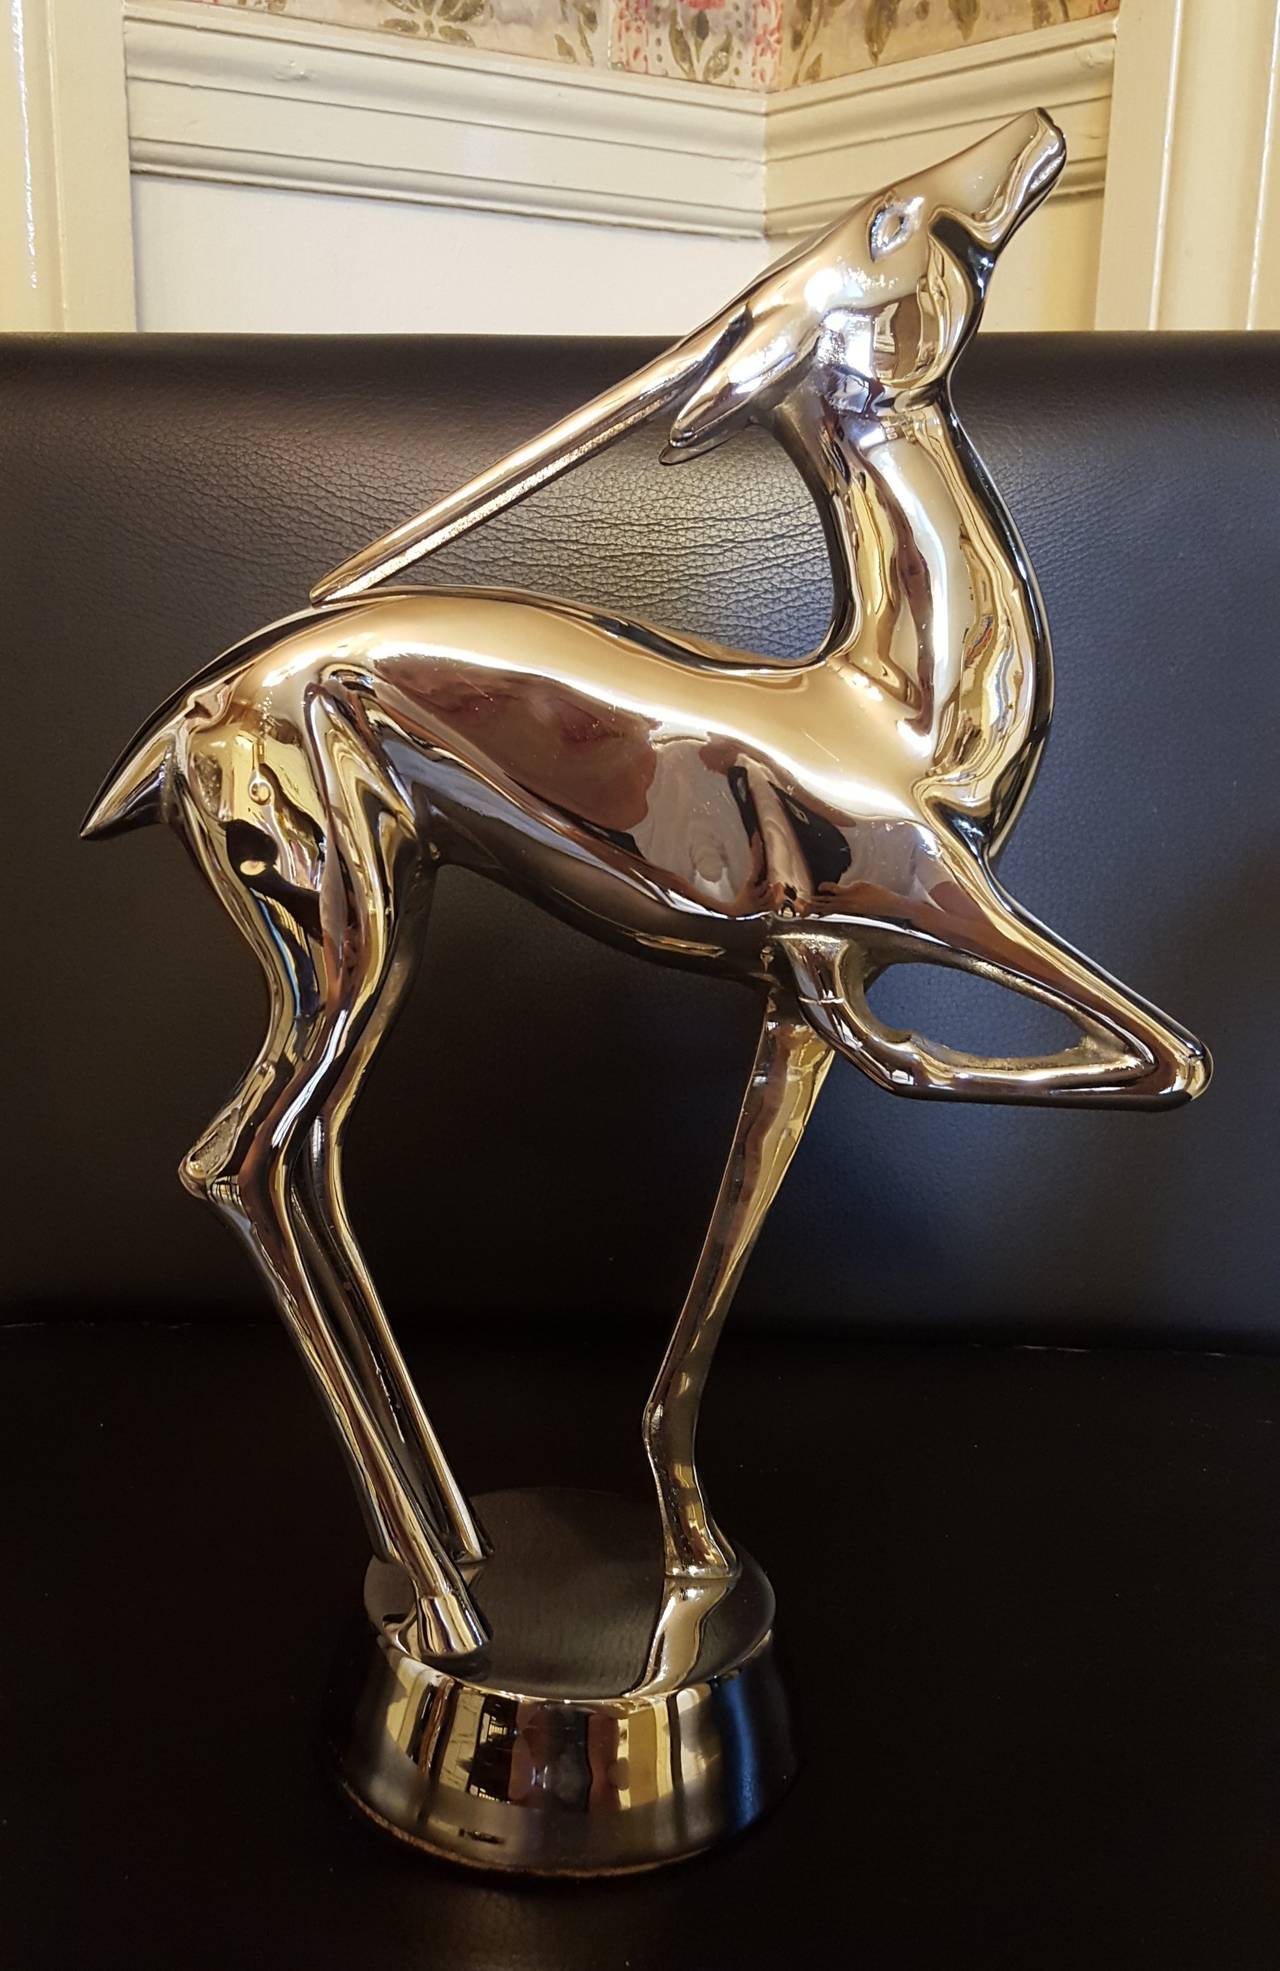 1930's Solid Chrome Art Deco Gazelle statue, unsigned. This beautiful rare piece of art deco sculpture weighs 5 pounds. Measures 14.5